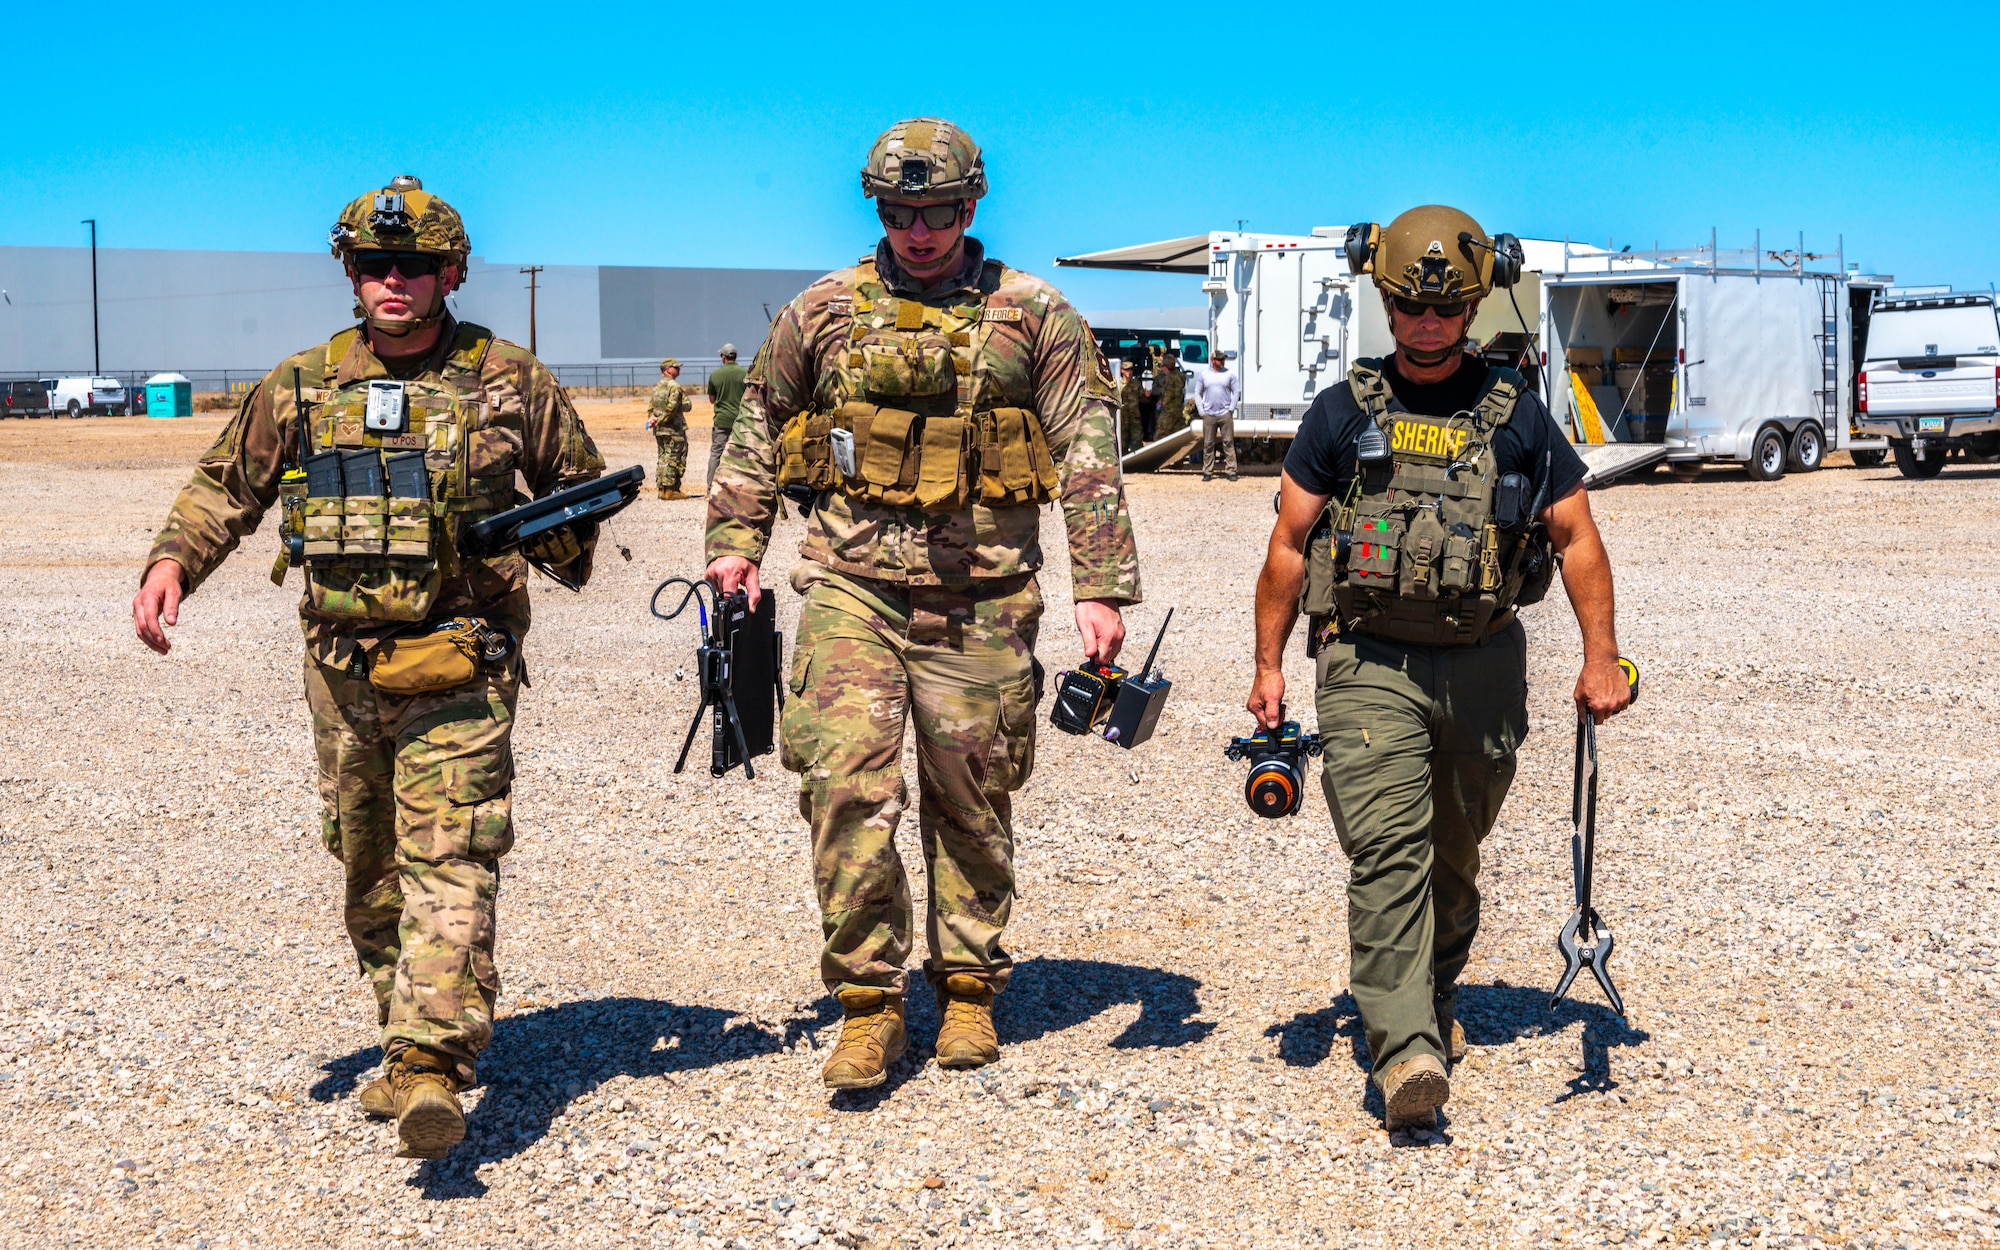 U.S. Air Force Senior Airman Steven Webb (left), Staff Sgt. Zackary Stringer (center), 56th Civil Engineer Squadron explosive ordnance disposal technicians, and Deputy Jason Schweizer (right), Maricopa County Sheriff‘s Office bomb technician, carry x-ray equipment during training exercise Road RAPTER  or Radiological Assistance Program Training for Emergency Response Sept. 7, 2023, at Luke Air Force Base, Arizona.